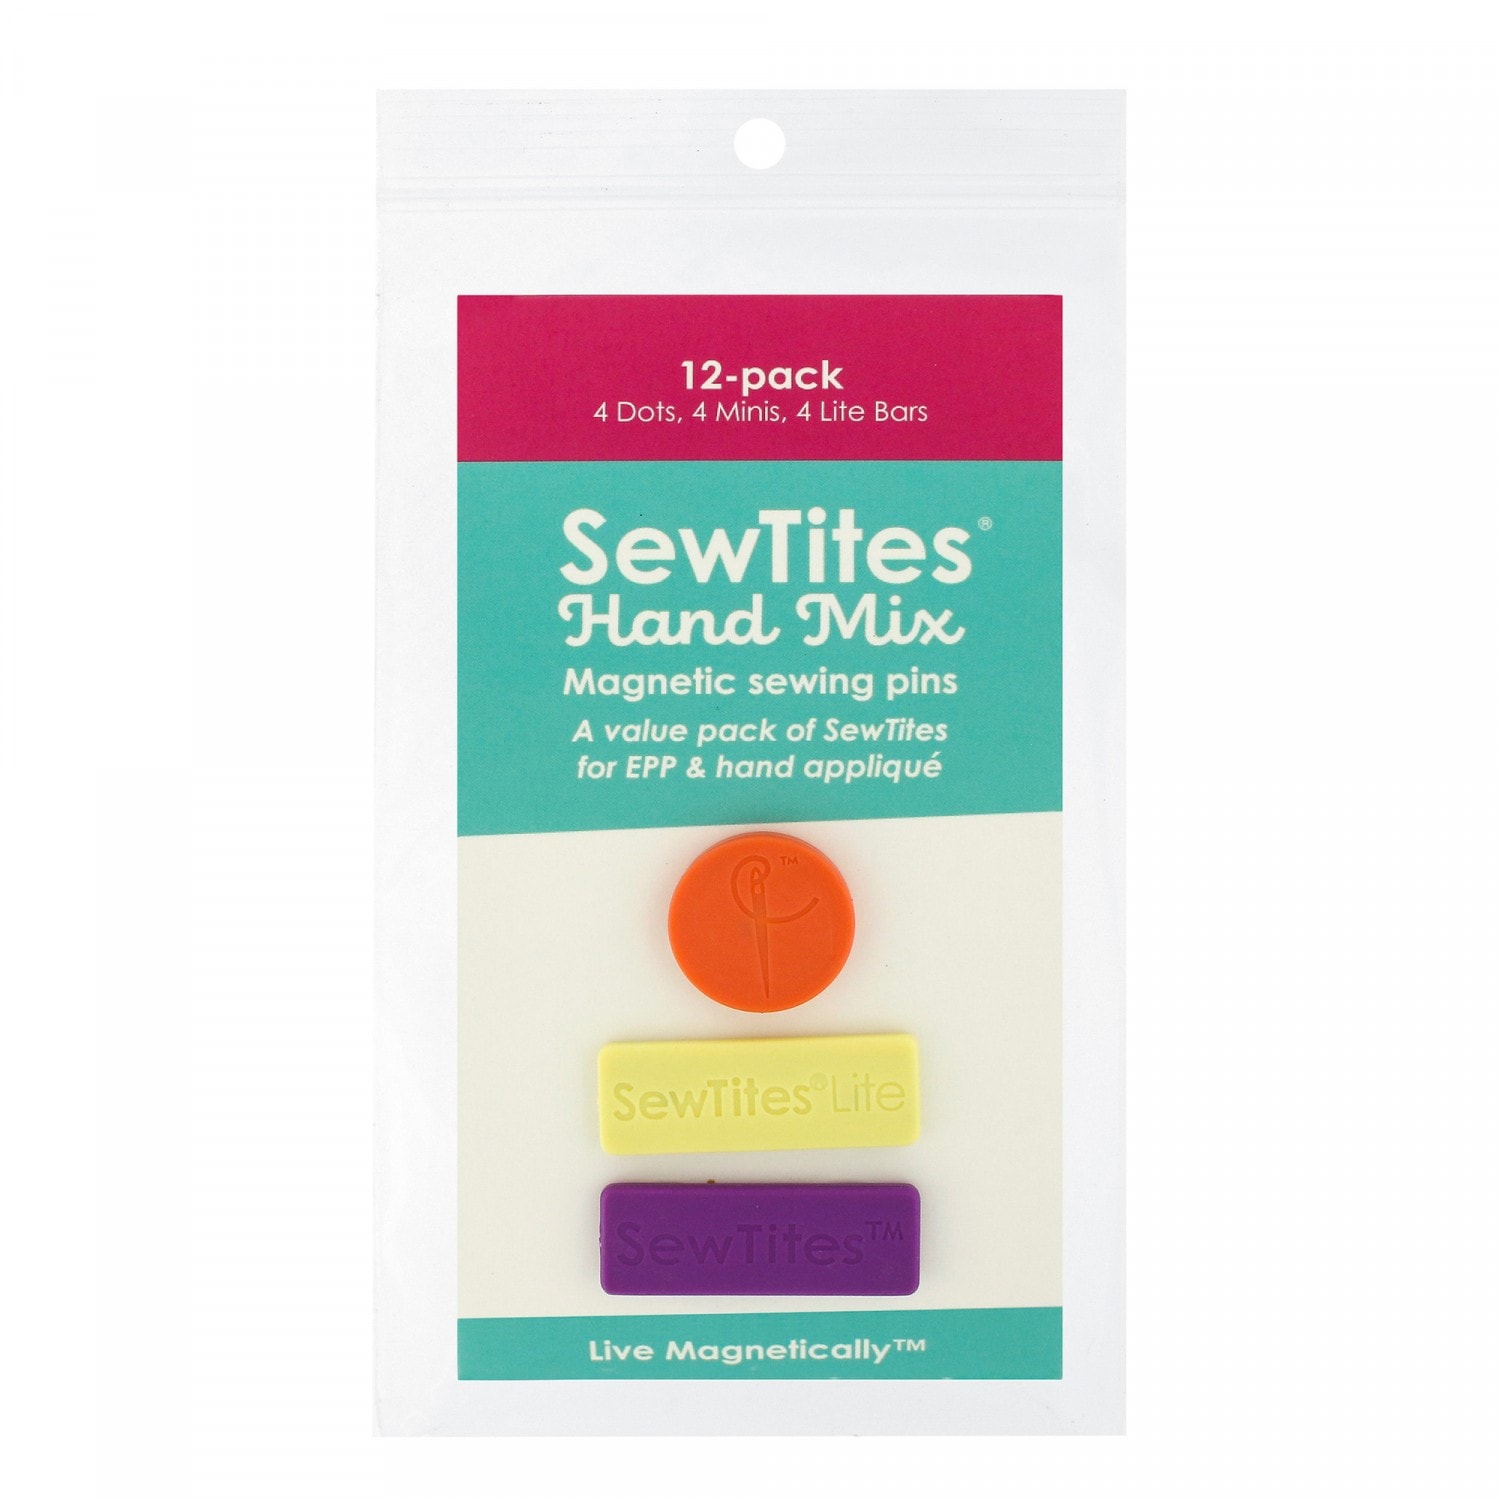 SewTites Hand Mix Magnetic Sewing Pins - 12-pack